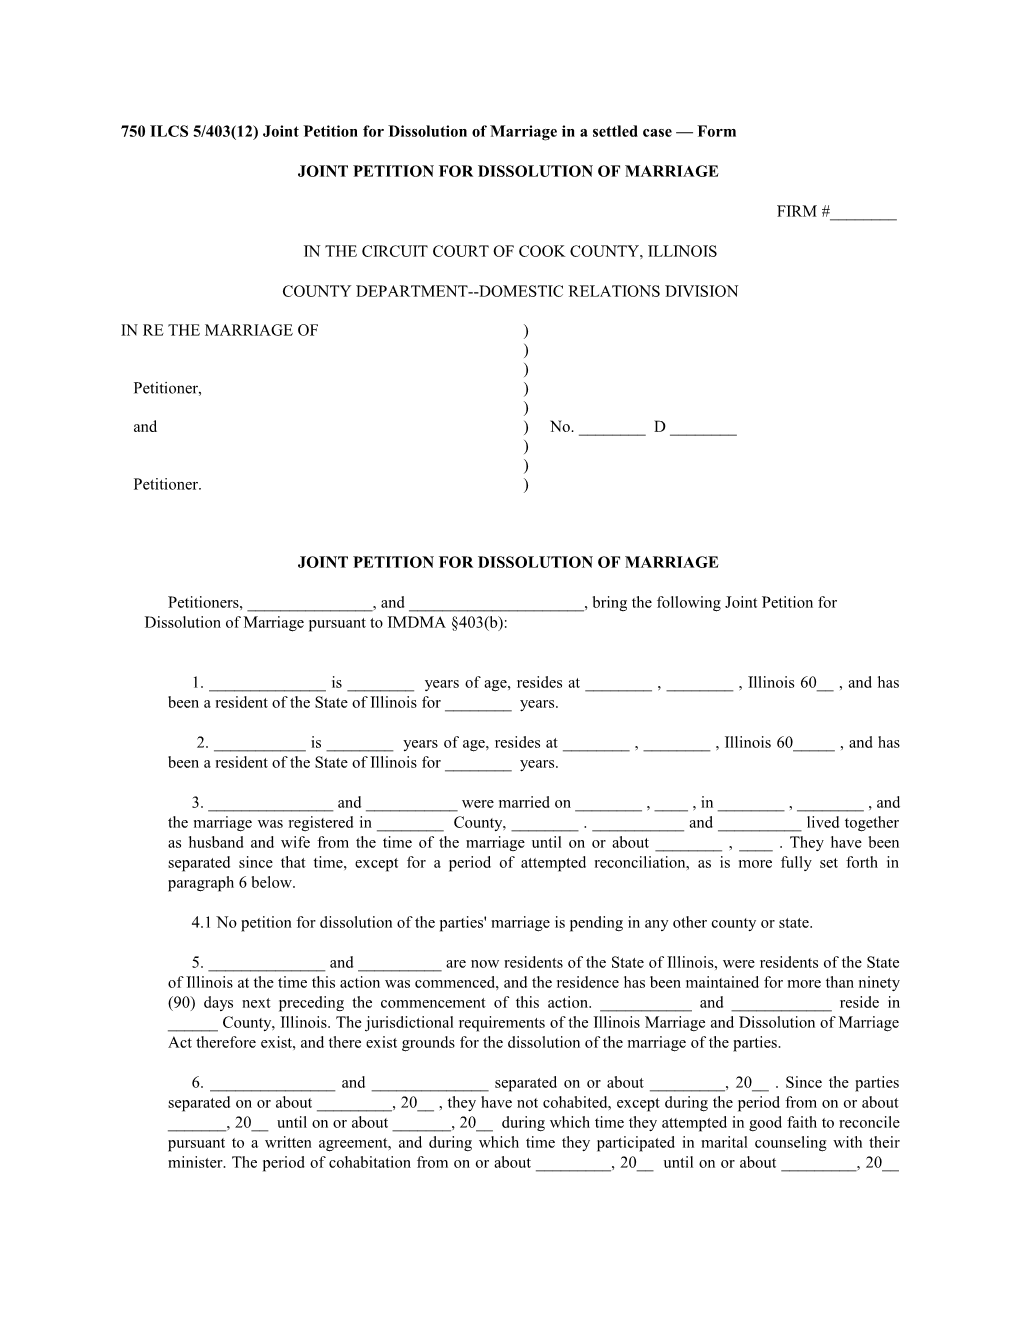 750 ILCS 5/403(12) Joint Petition for Dissolution of Marriage in a Settled Case Form